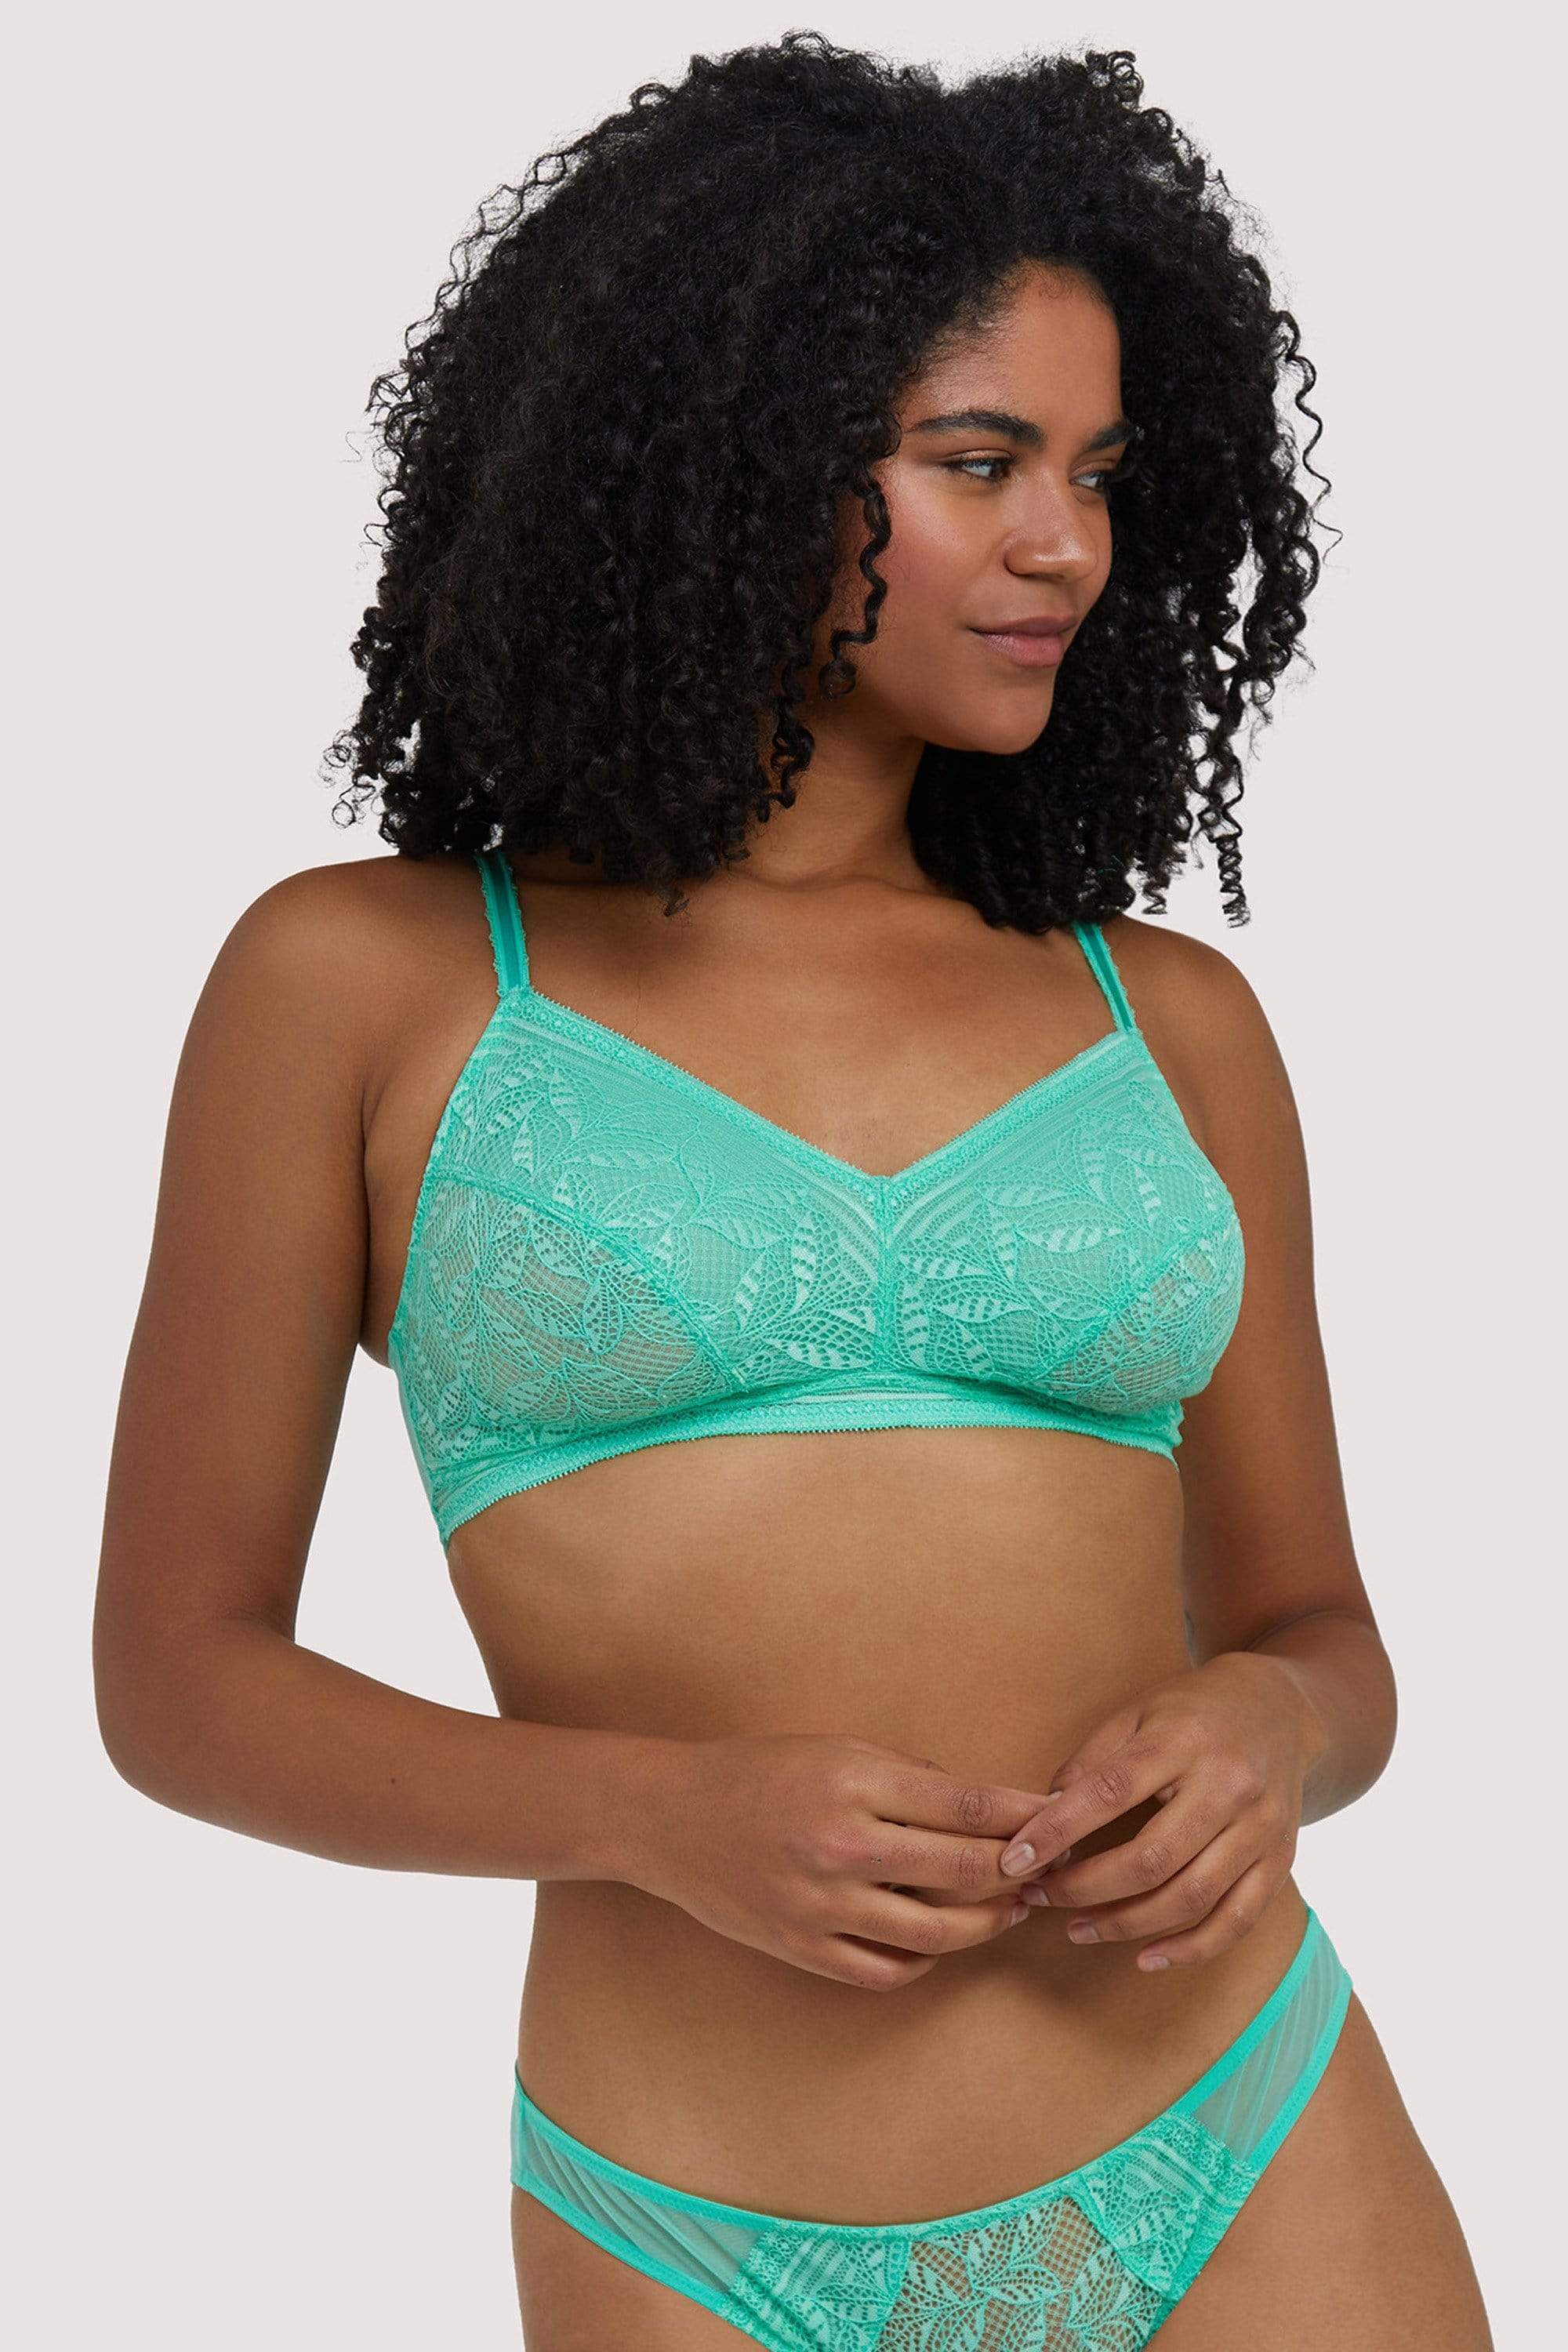 DKNY Intimates Lace Comfort Wireless Bra In Desert Sage-Green for Women